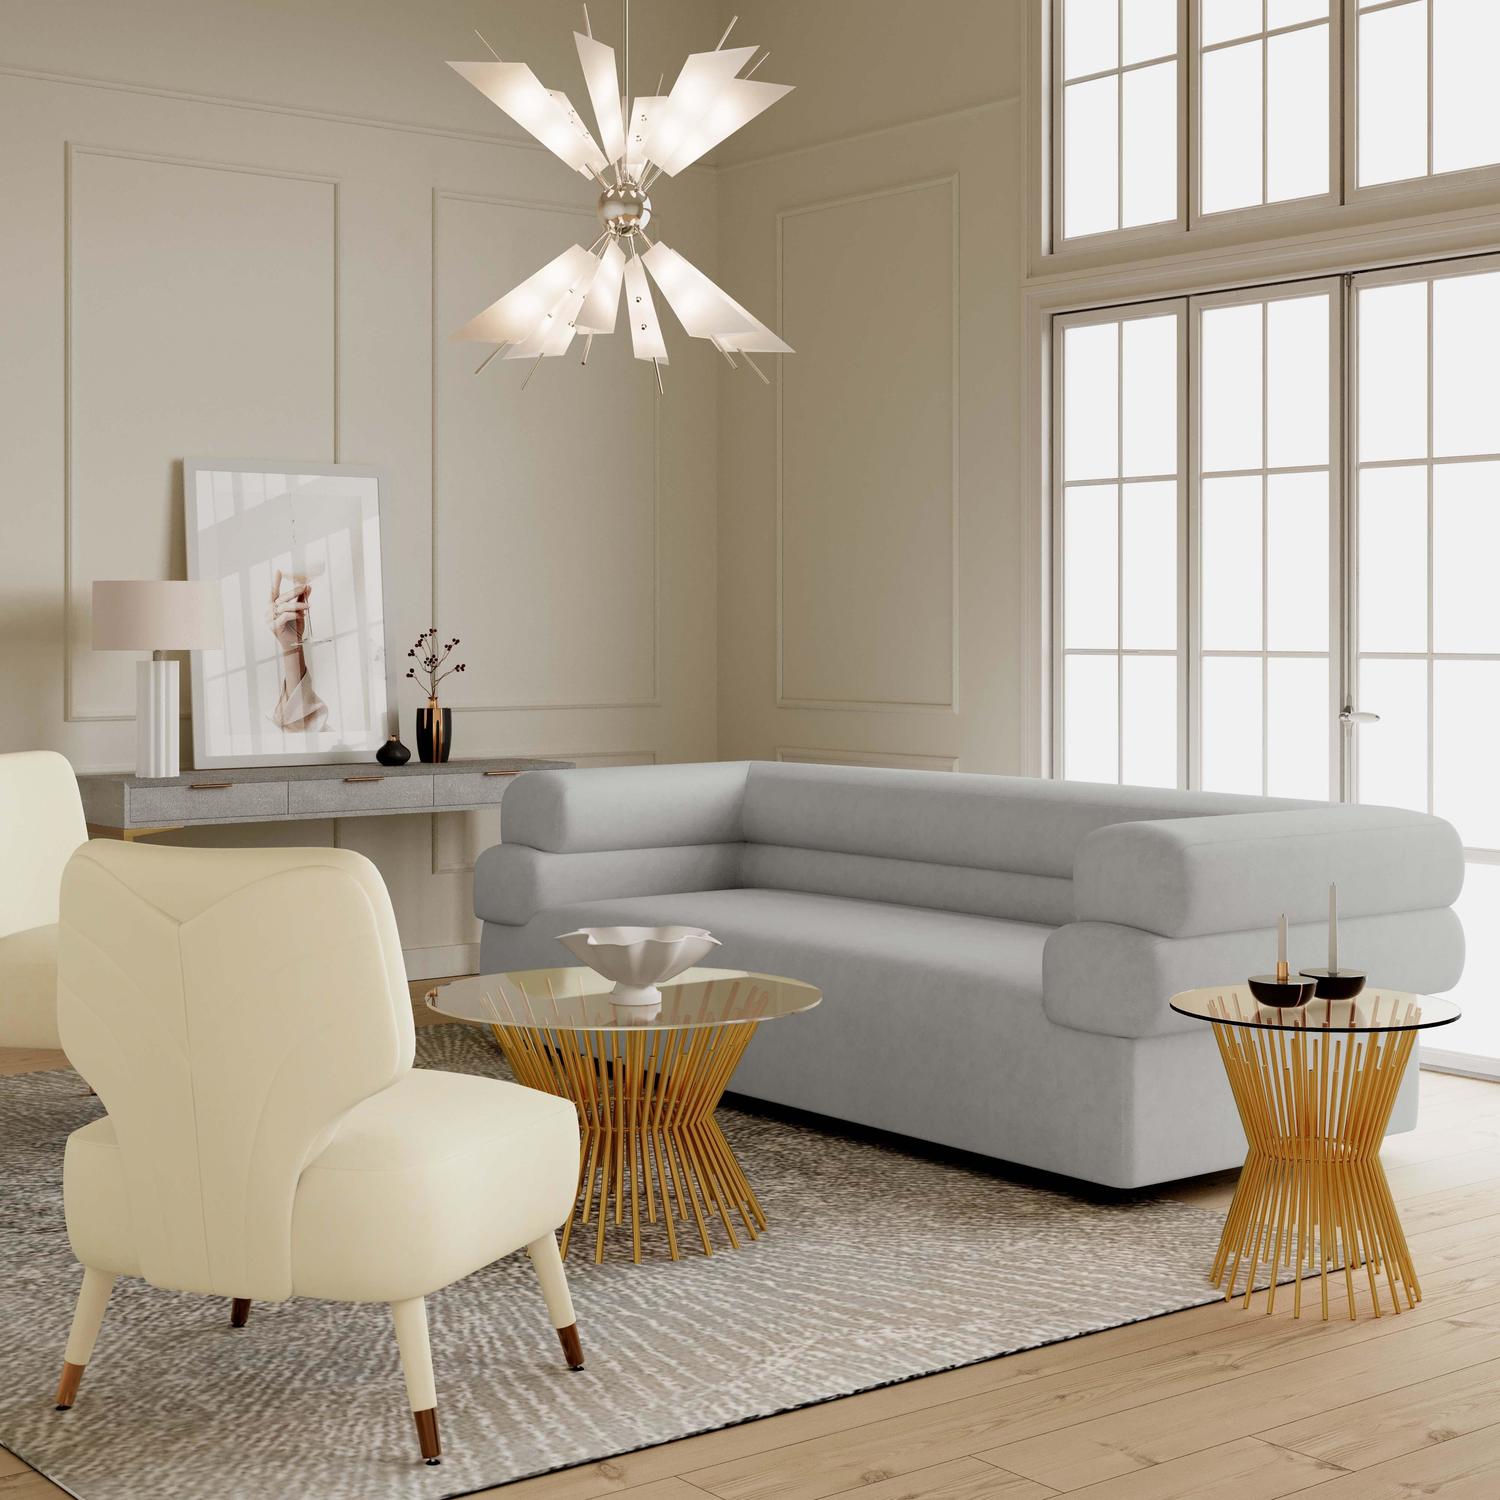 white modern leather sofa Contemporary Design Furniture Sofas Sofas and Loveseat Light Grey